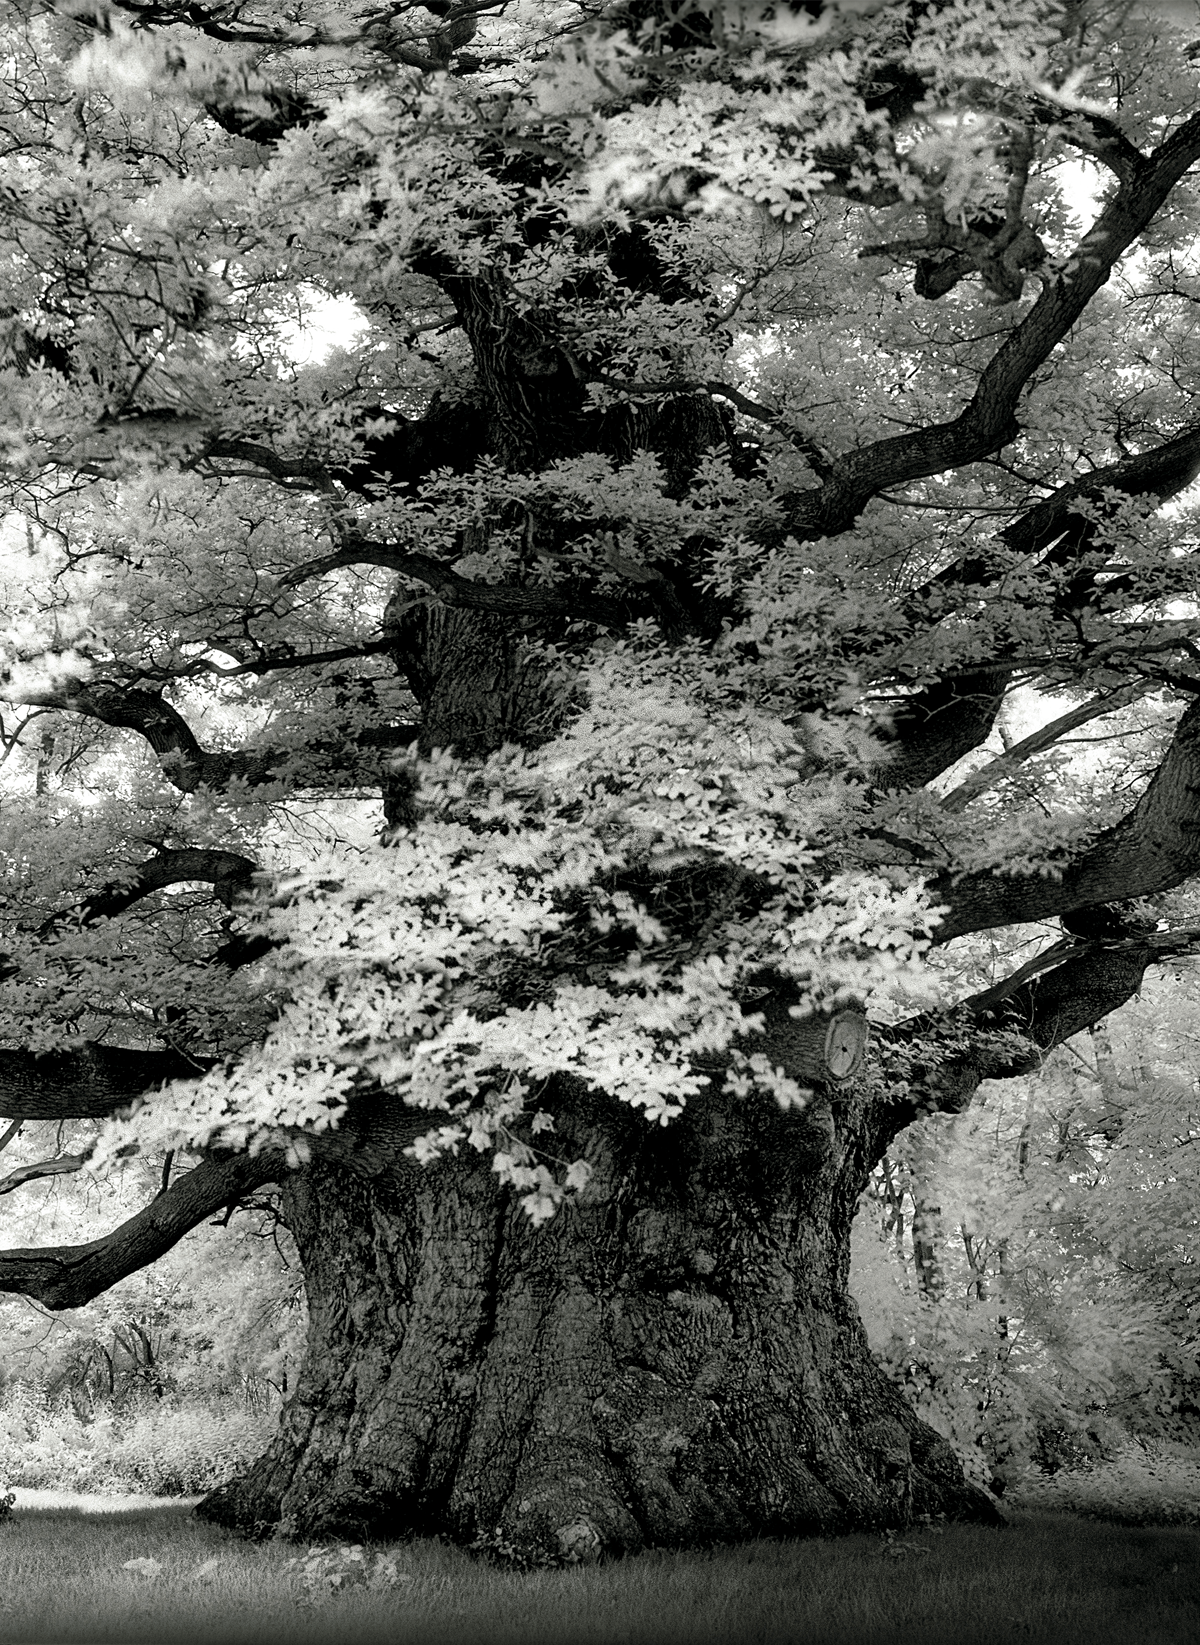 Black-and-white image shows a large English oak.